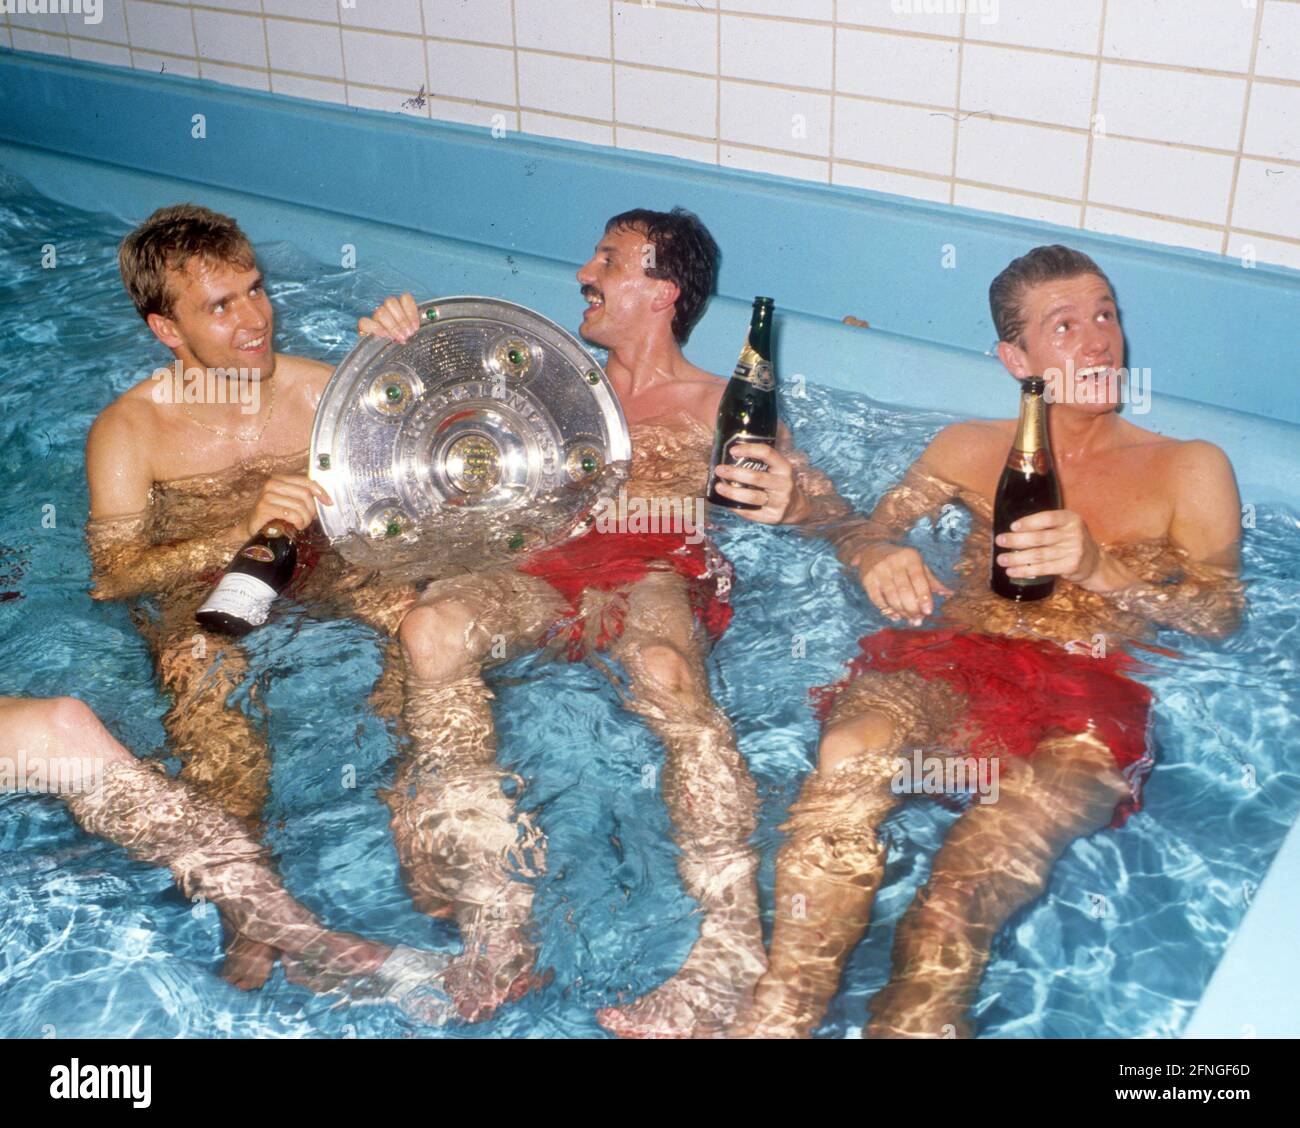 'FC Bayern München German Champion 1990. FC Bayern championship celebration in the dressing room. 12.05.1990. From left: Hans-Dieter ''Hansi'' Flick, Jürgen Kohler and Thomas Strunz with the championship trophy in the fatigue pool. [automated translation]' Stock Photo